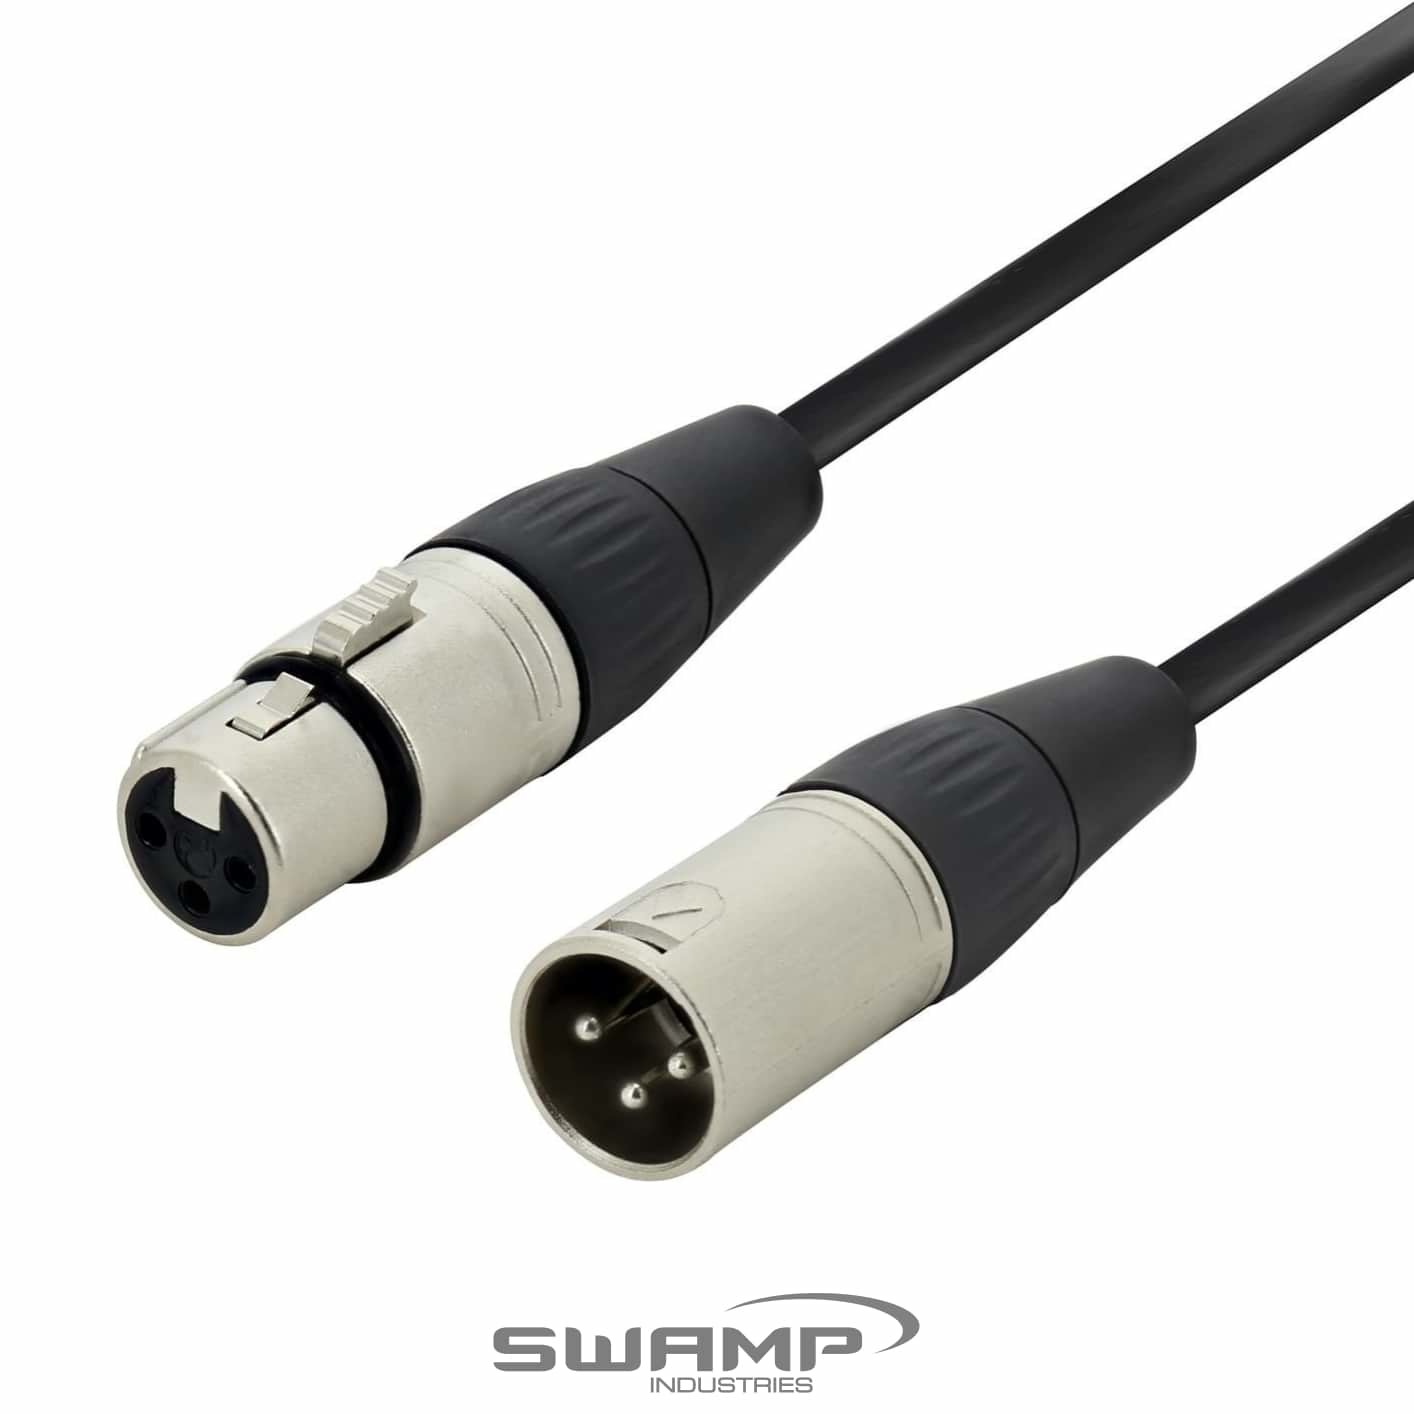 SWAMP Colour Code XLR Mic Cable - Balanced Microphone Lead - Selectable Length